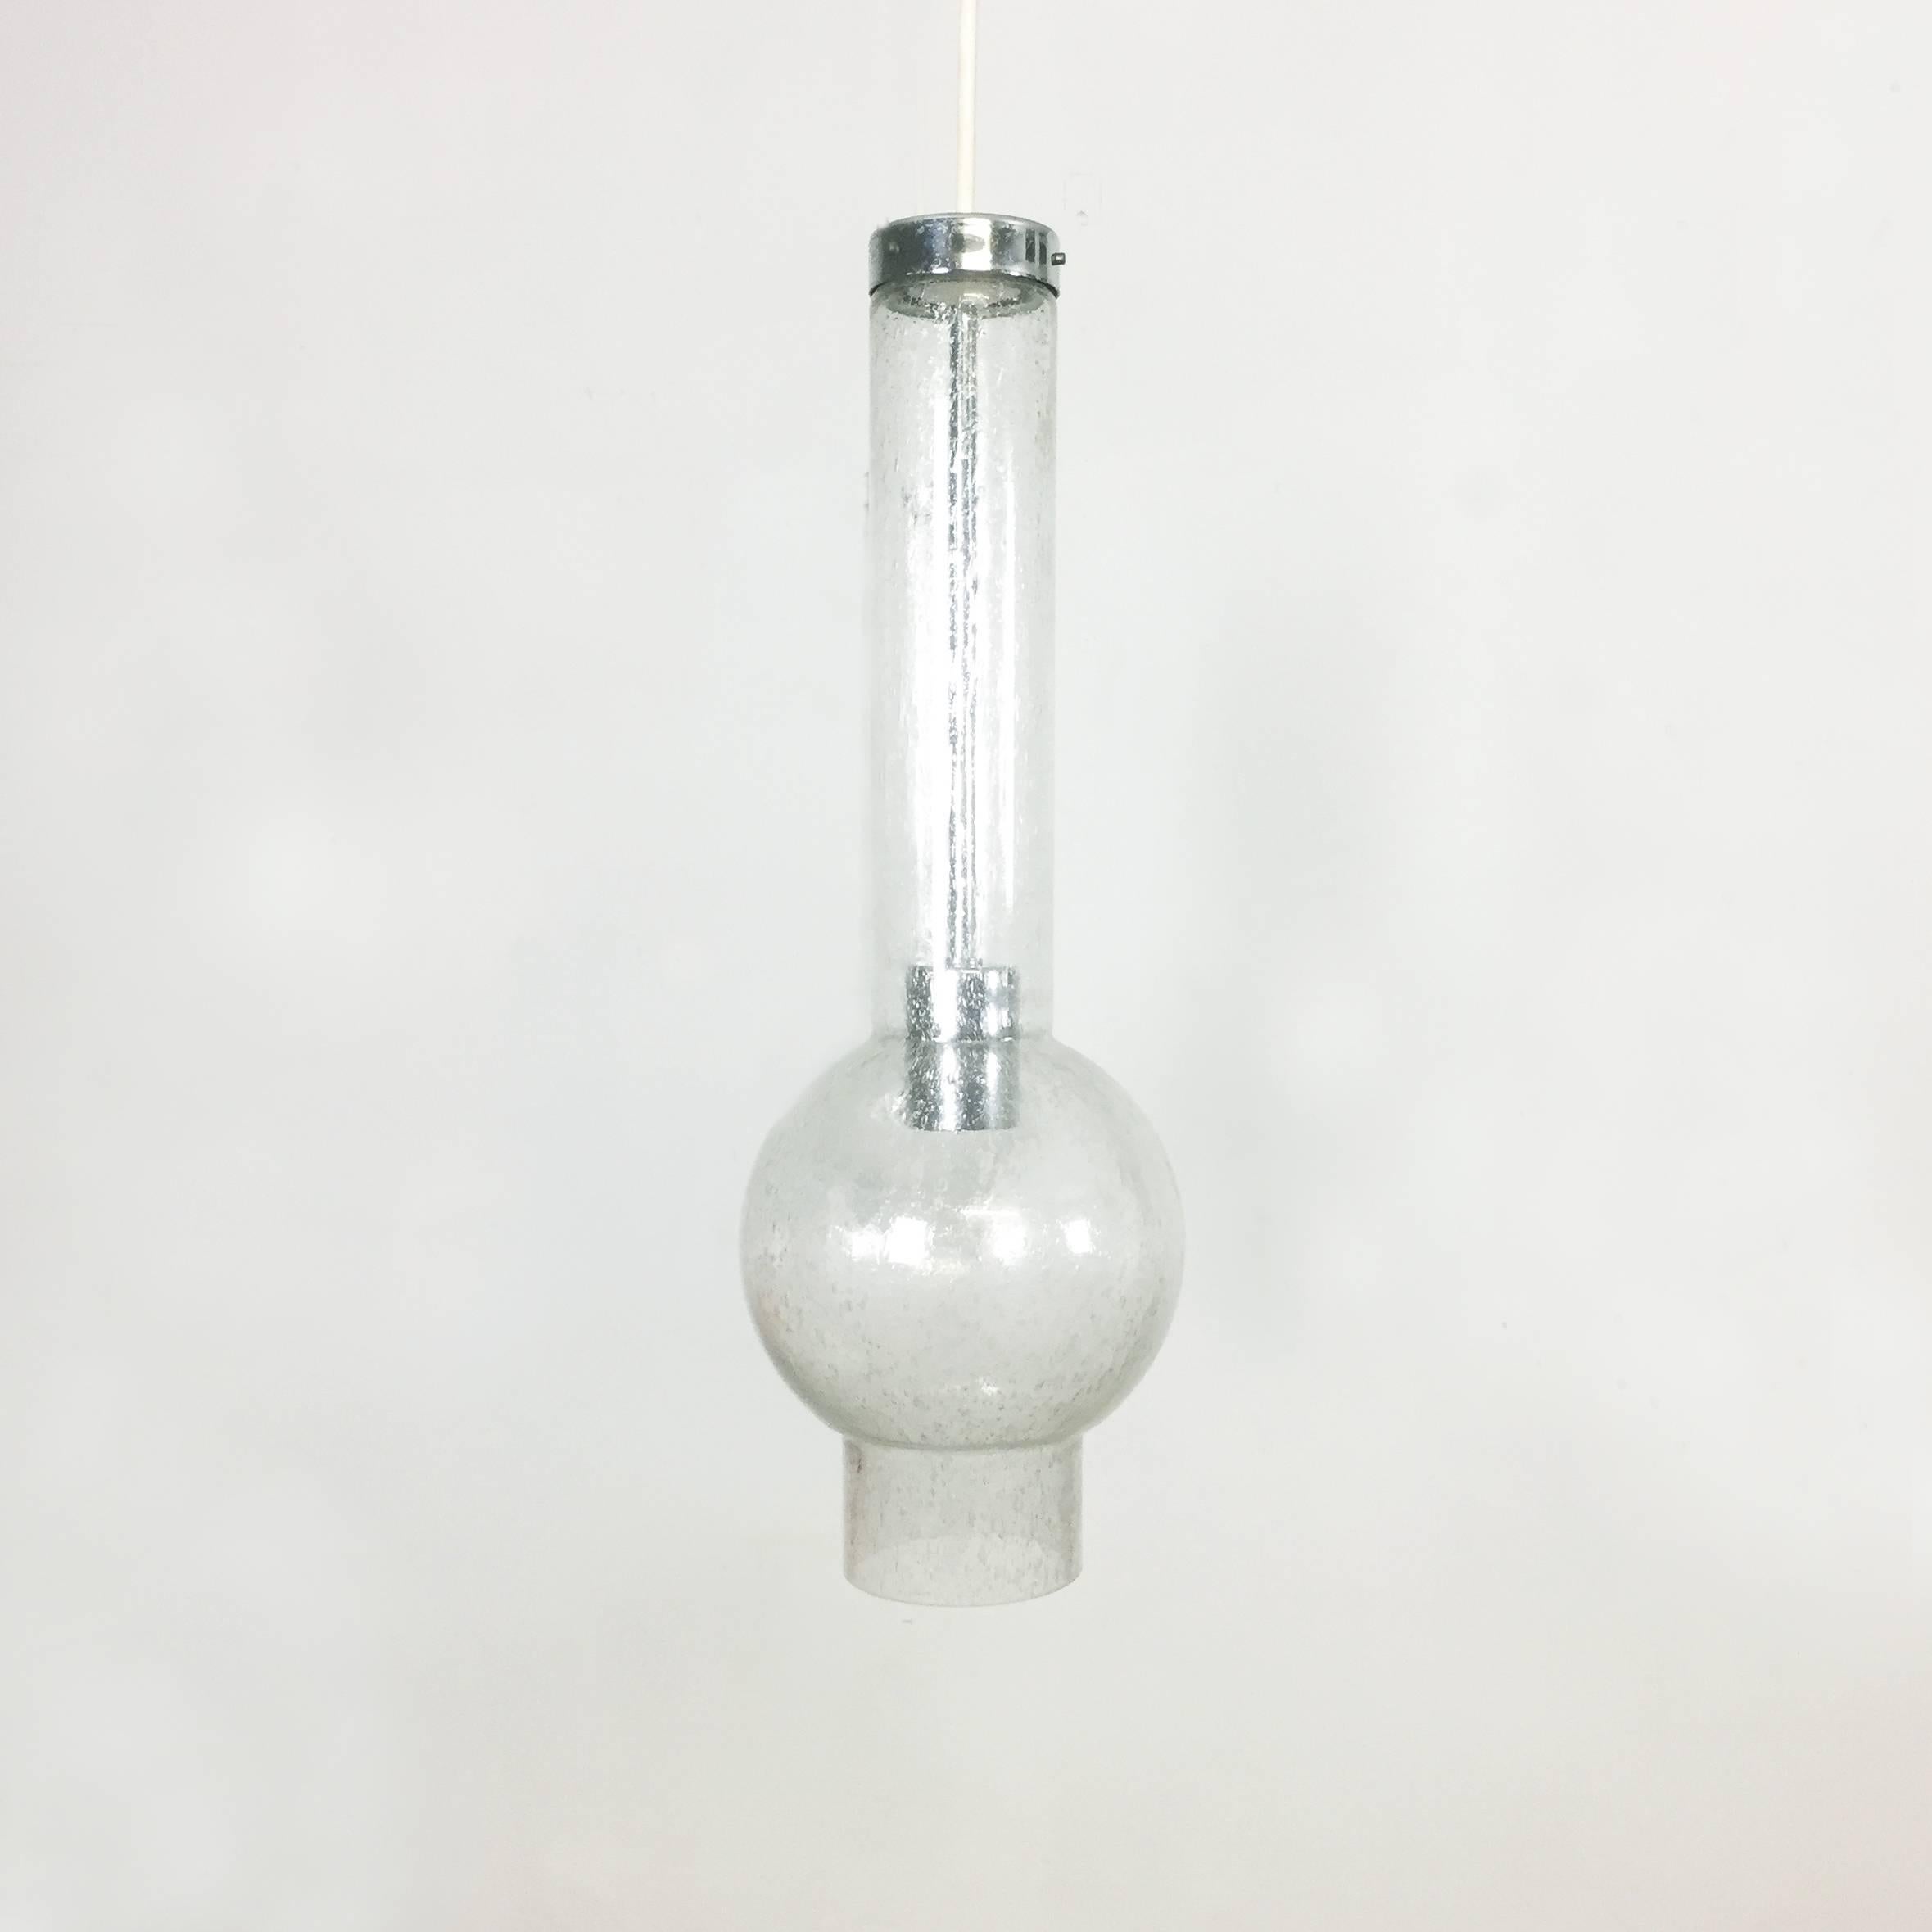 1 of 3 Handblown Glass Tube Light Made by Staff Lights 1970s, Germany For Sale 2